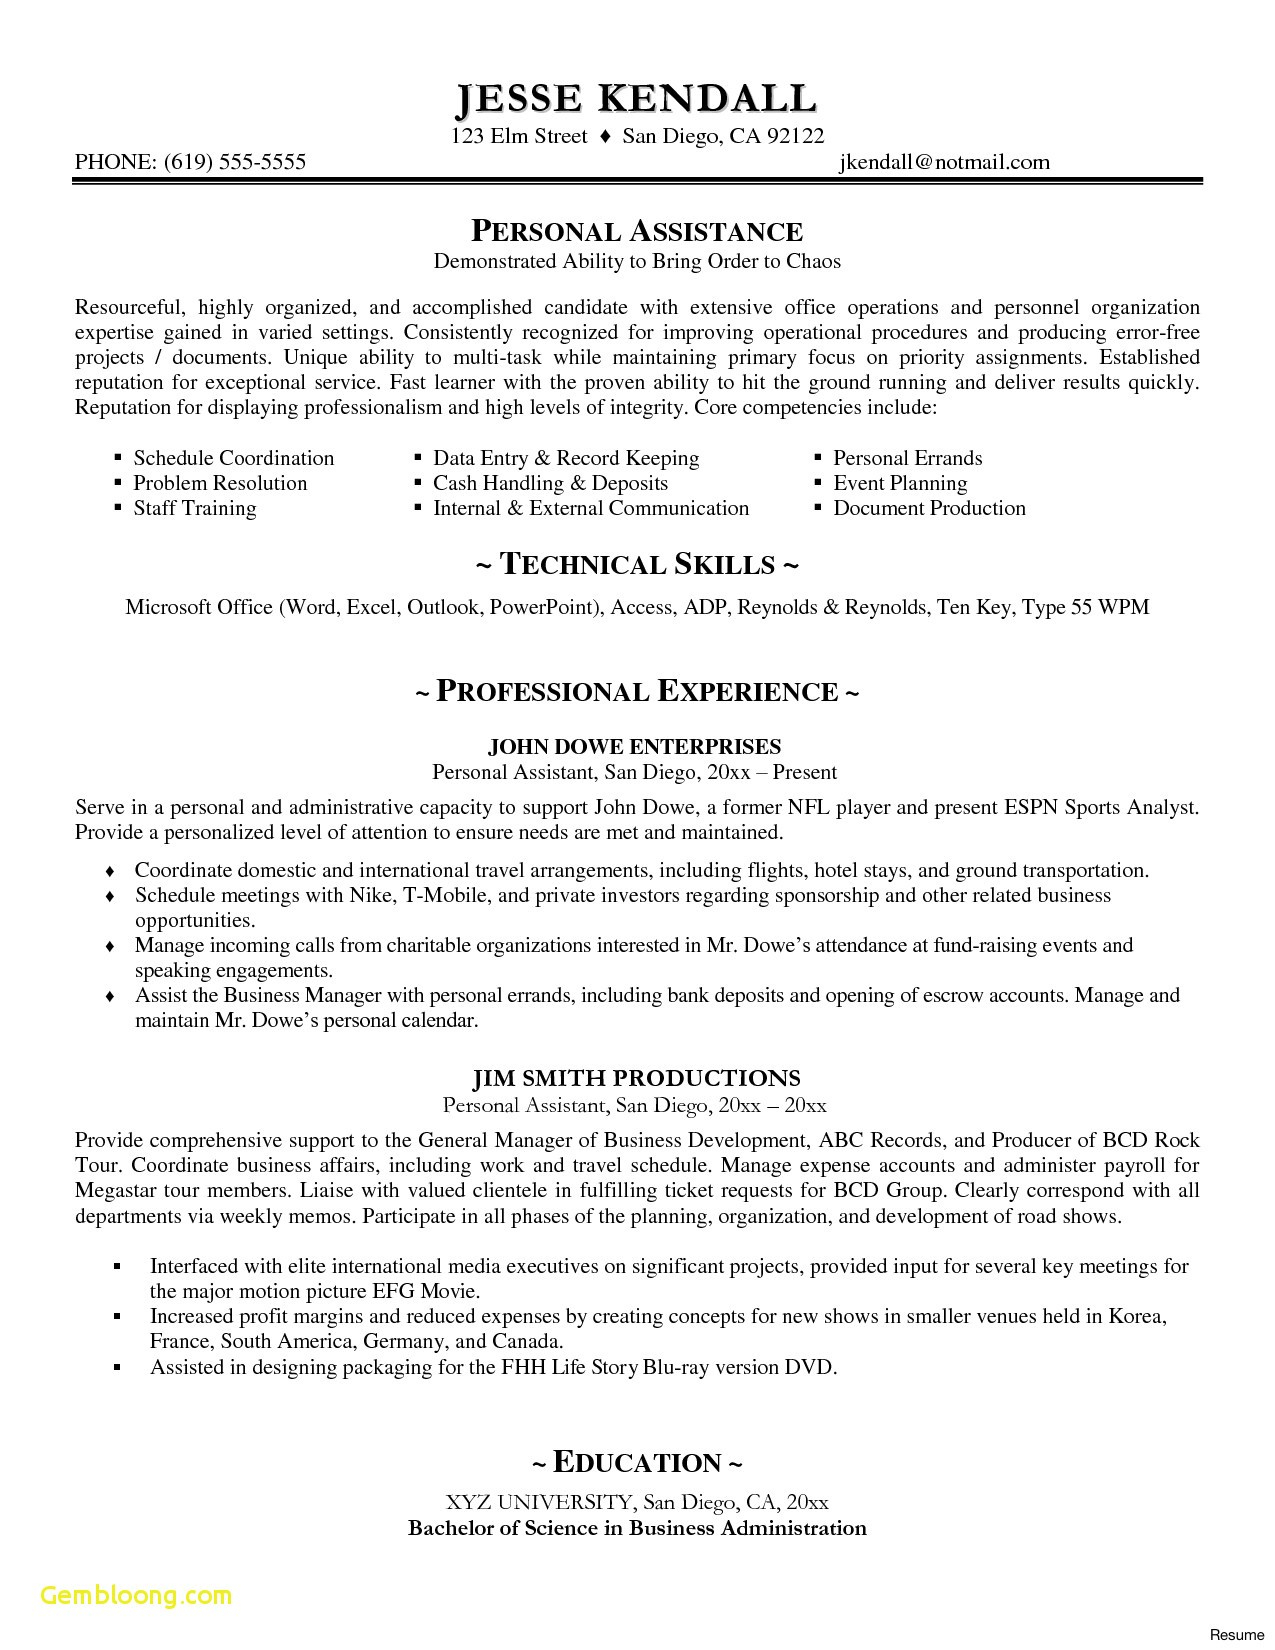 Service Animal Letter Template - Awesome Resume Cover Letter Template